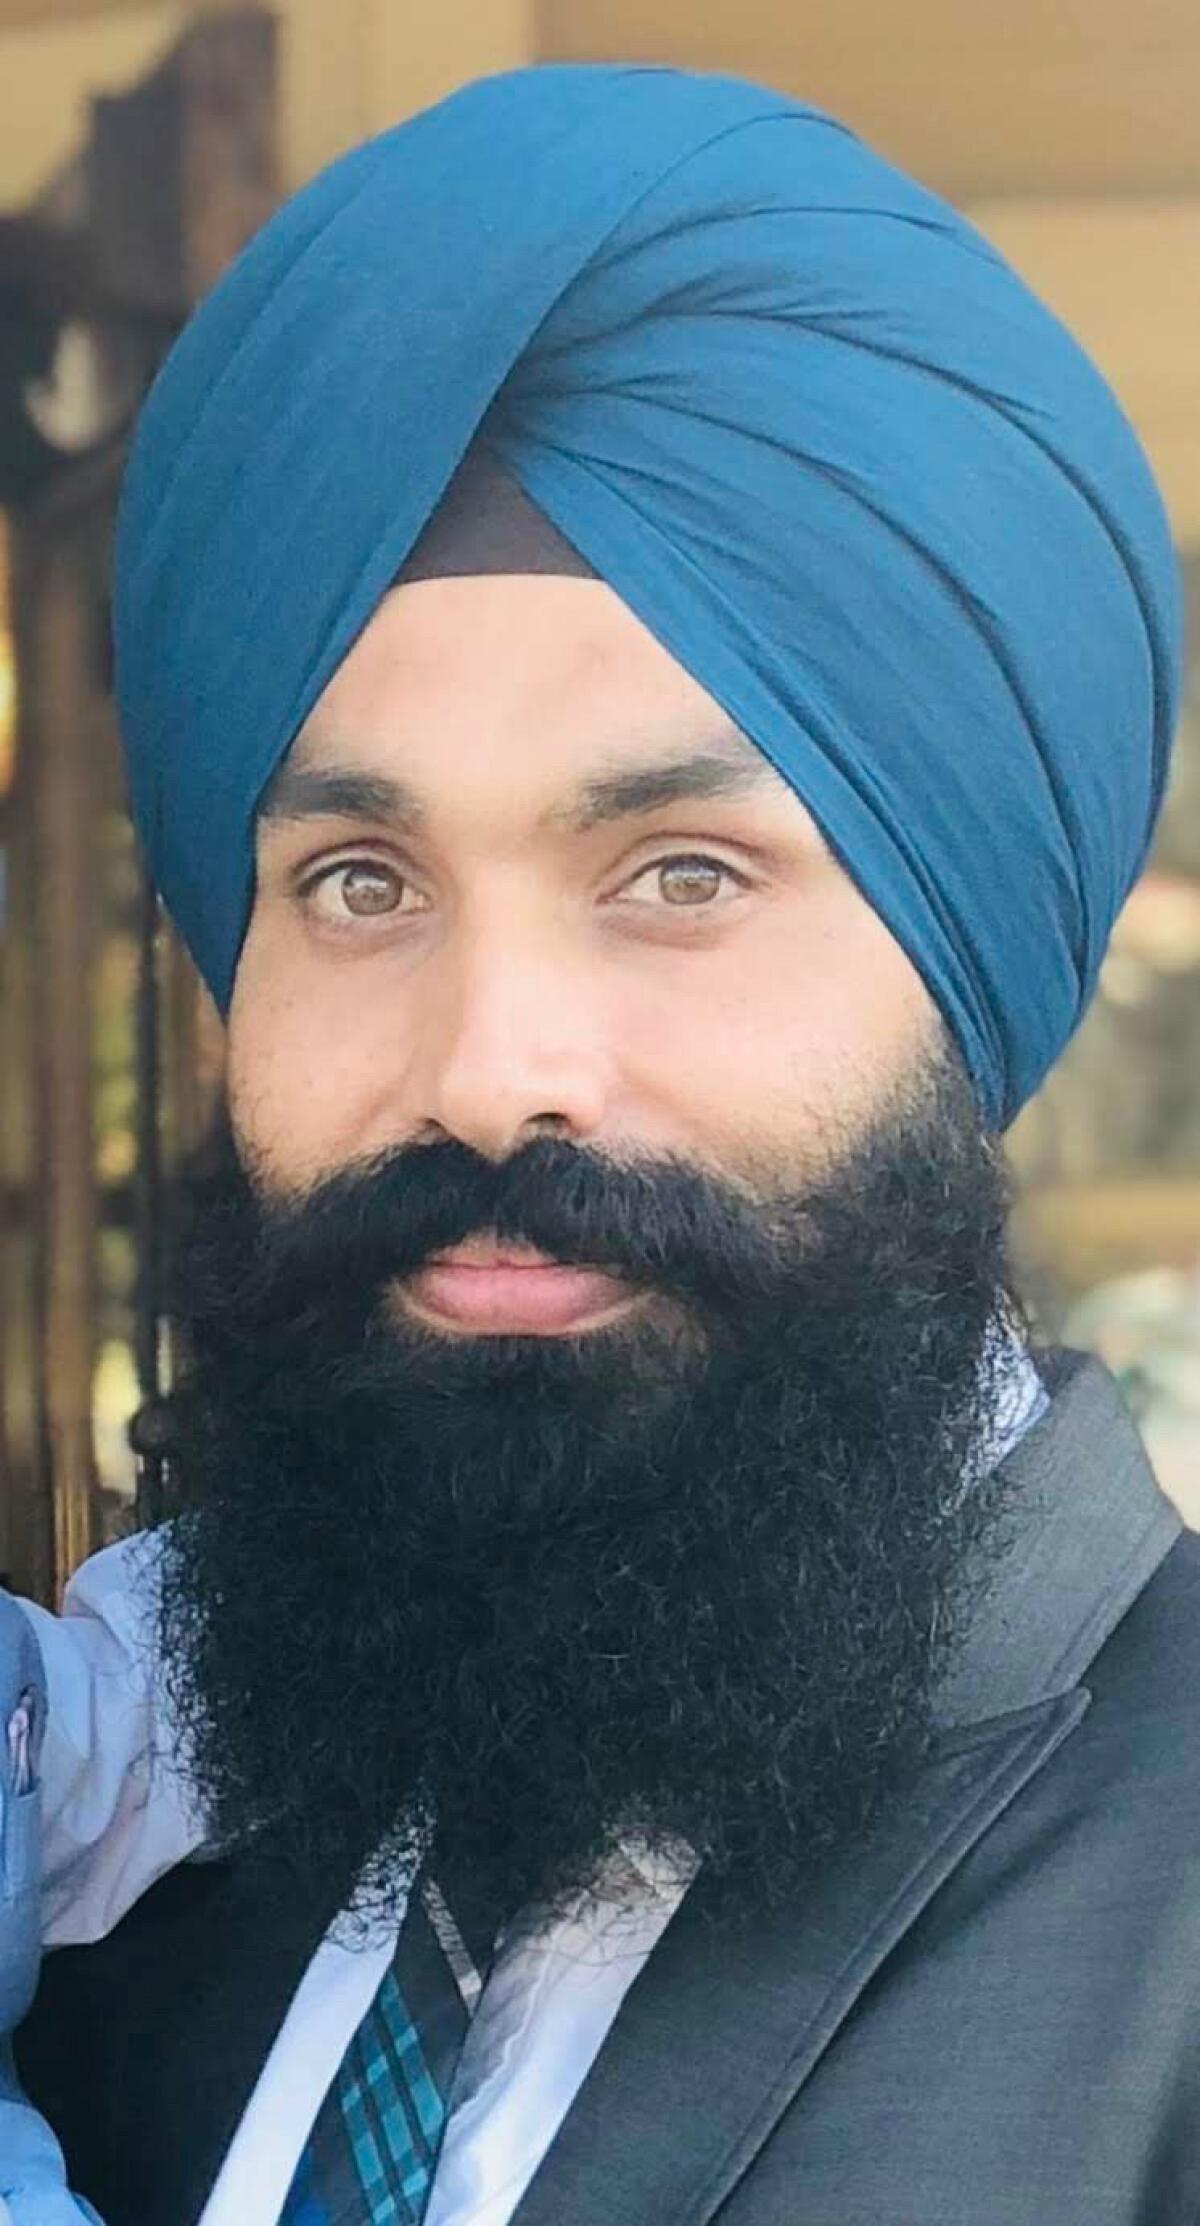 Taptejdeep Singh wears a turban and smiles.